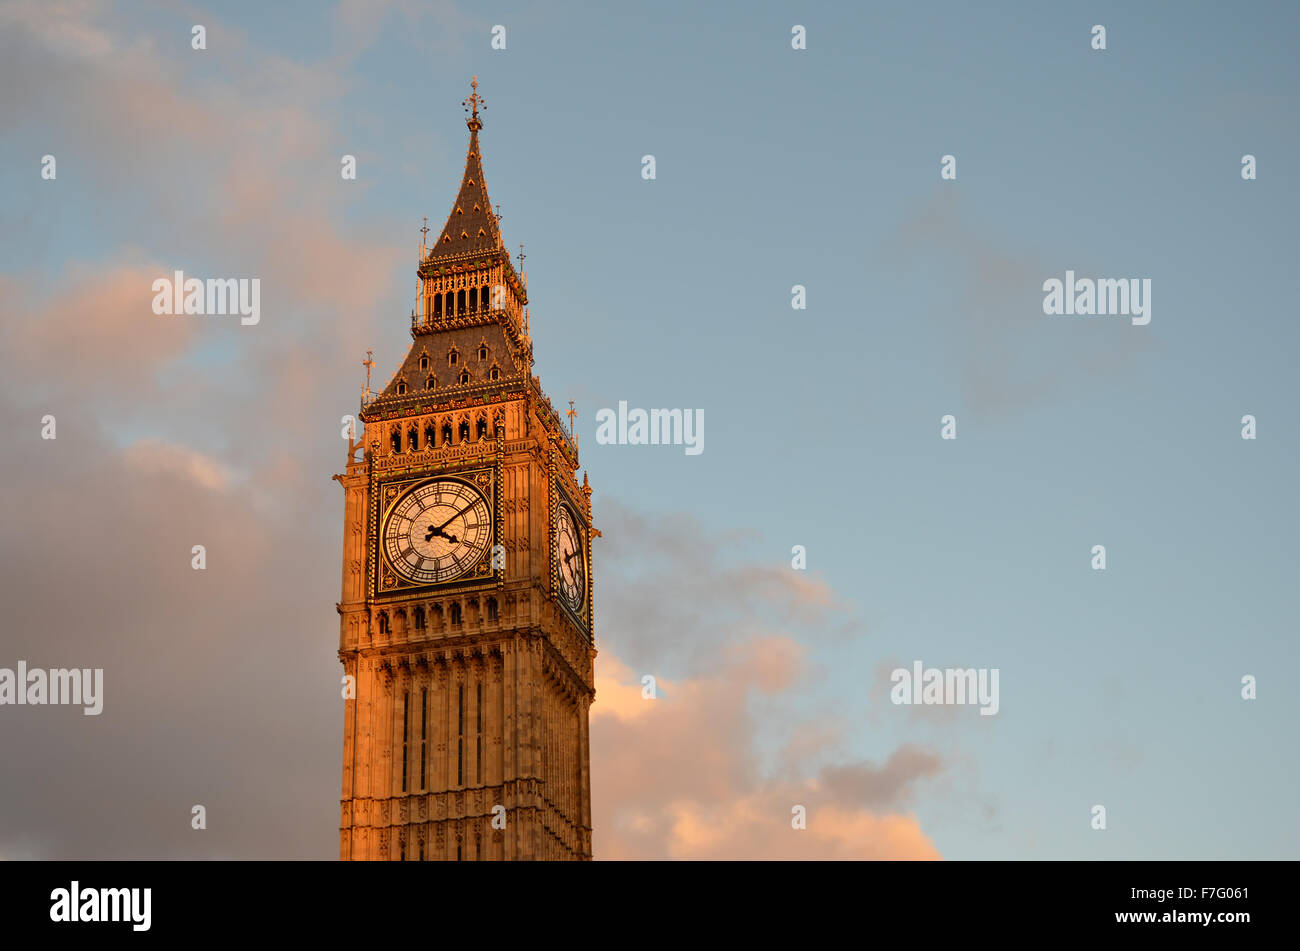 The top of the Big Ben clock tower in the late afternoon sunlight of sunset with a blue sky and some clouds in London, UK. Stock Photo